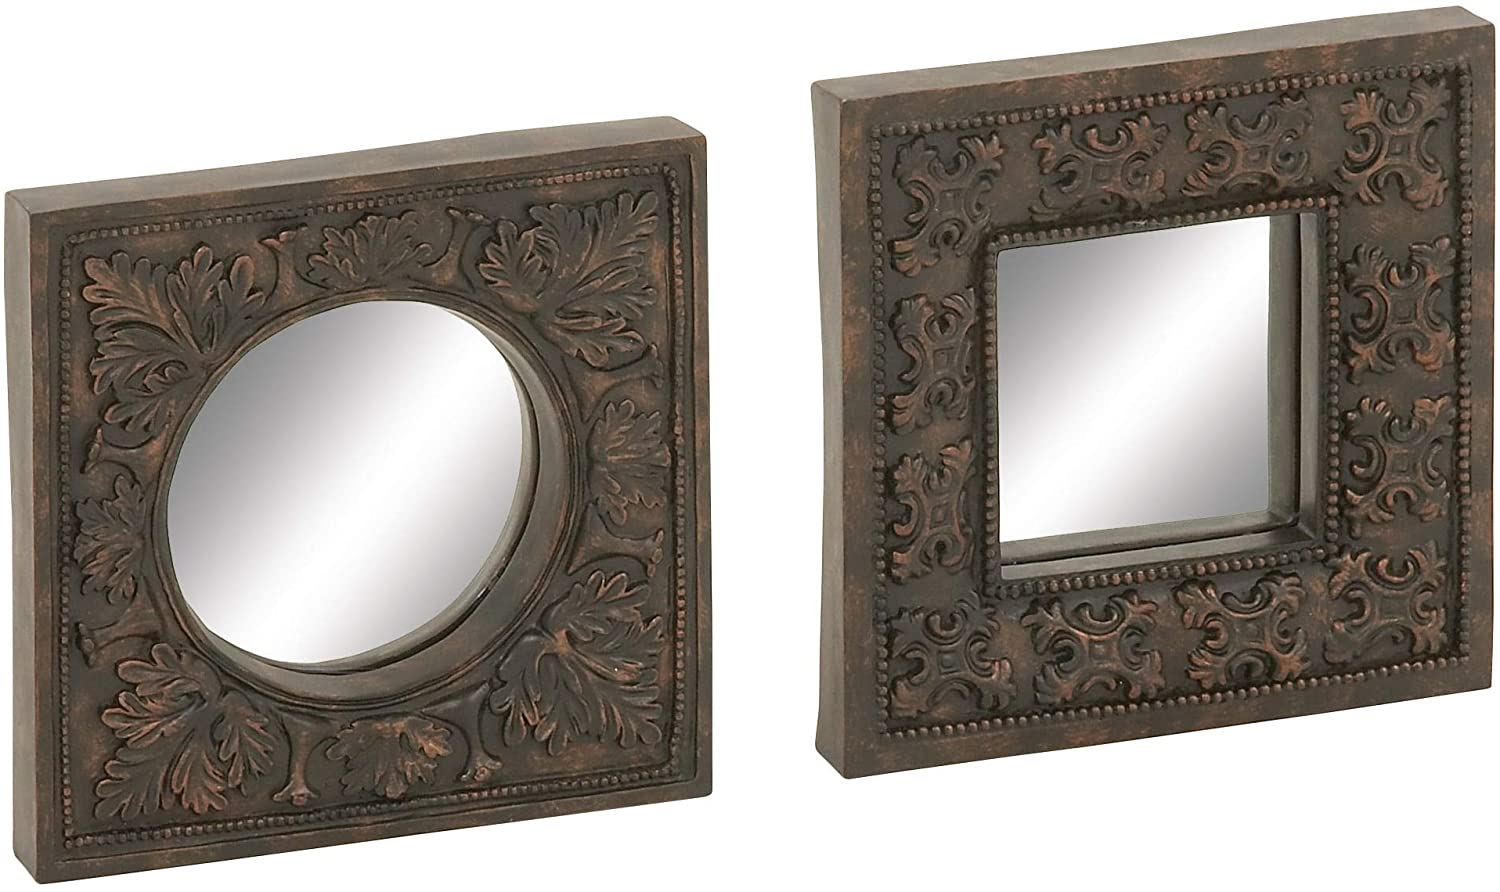 Mirror Wall Decor Set 2 11 Inches Wide High